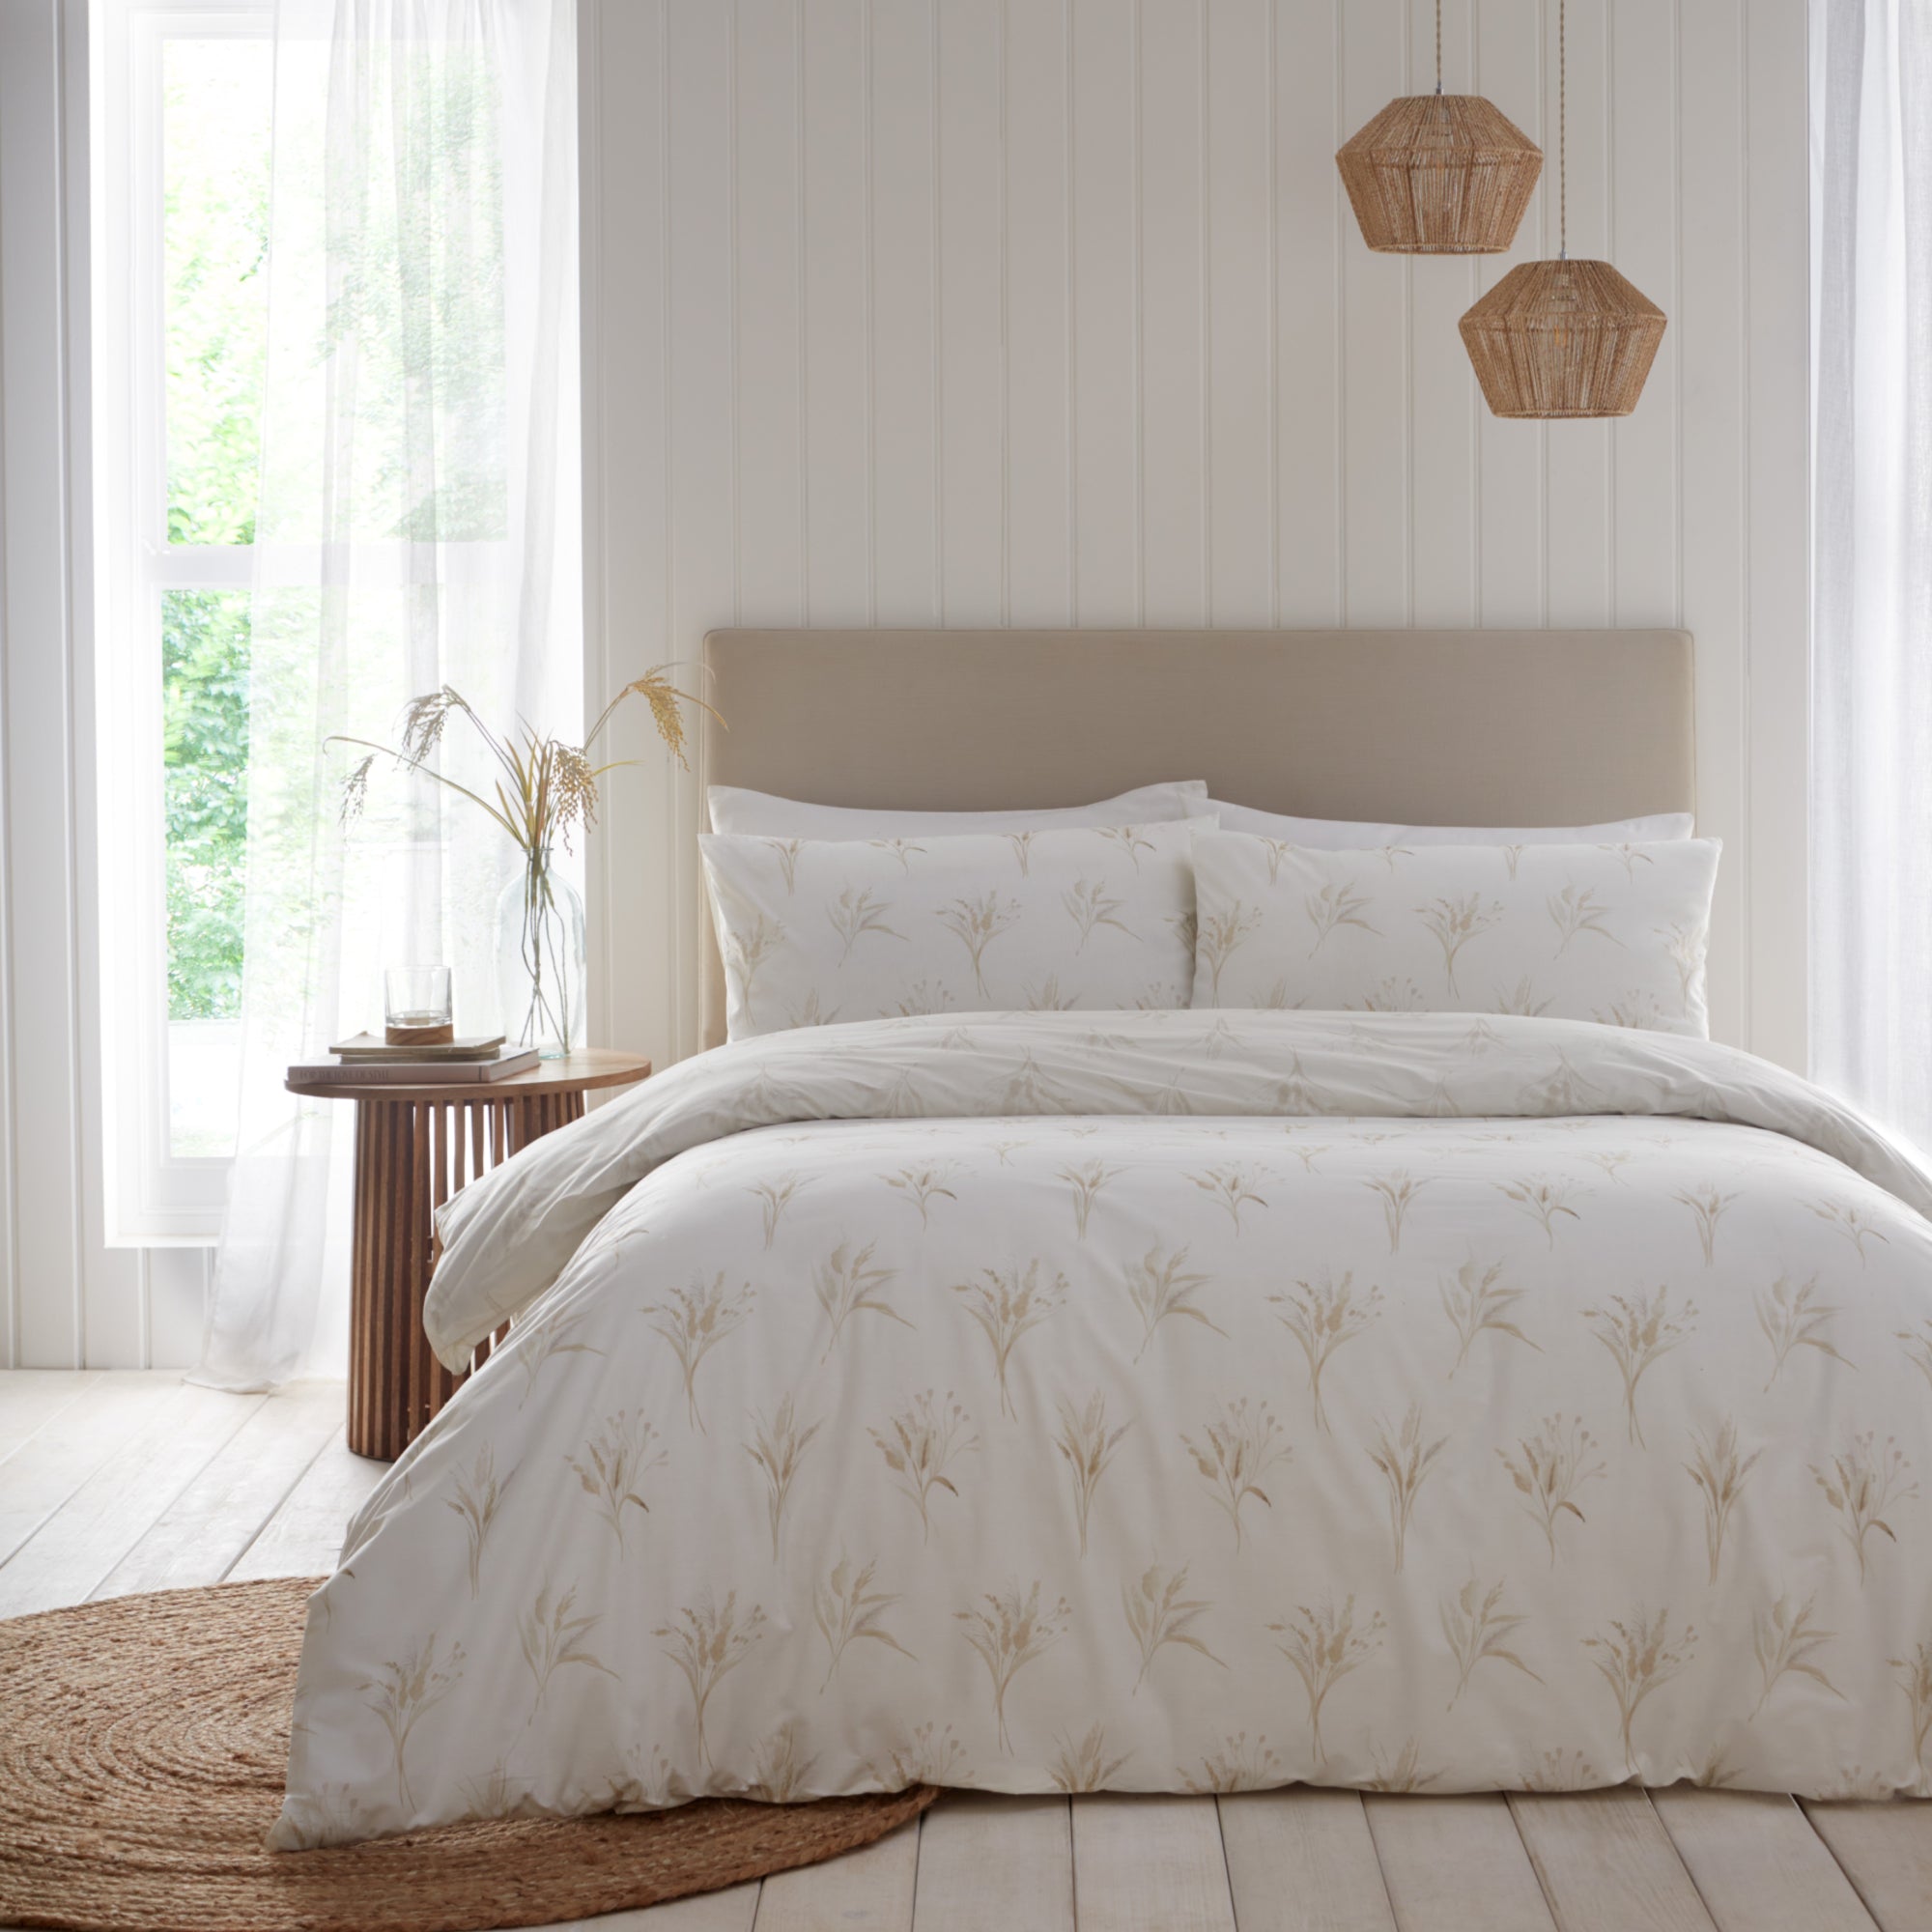 Duvet Cover Set Harmony by Drift Home in Natural